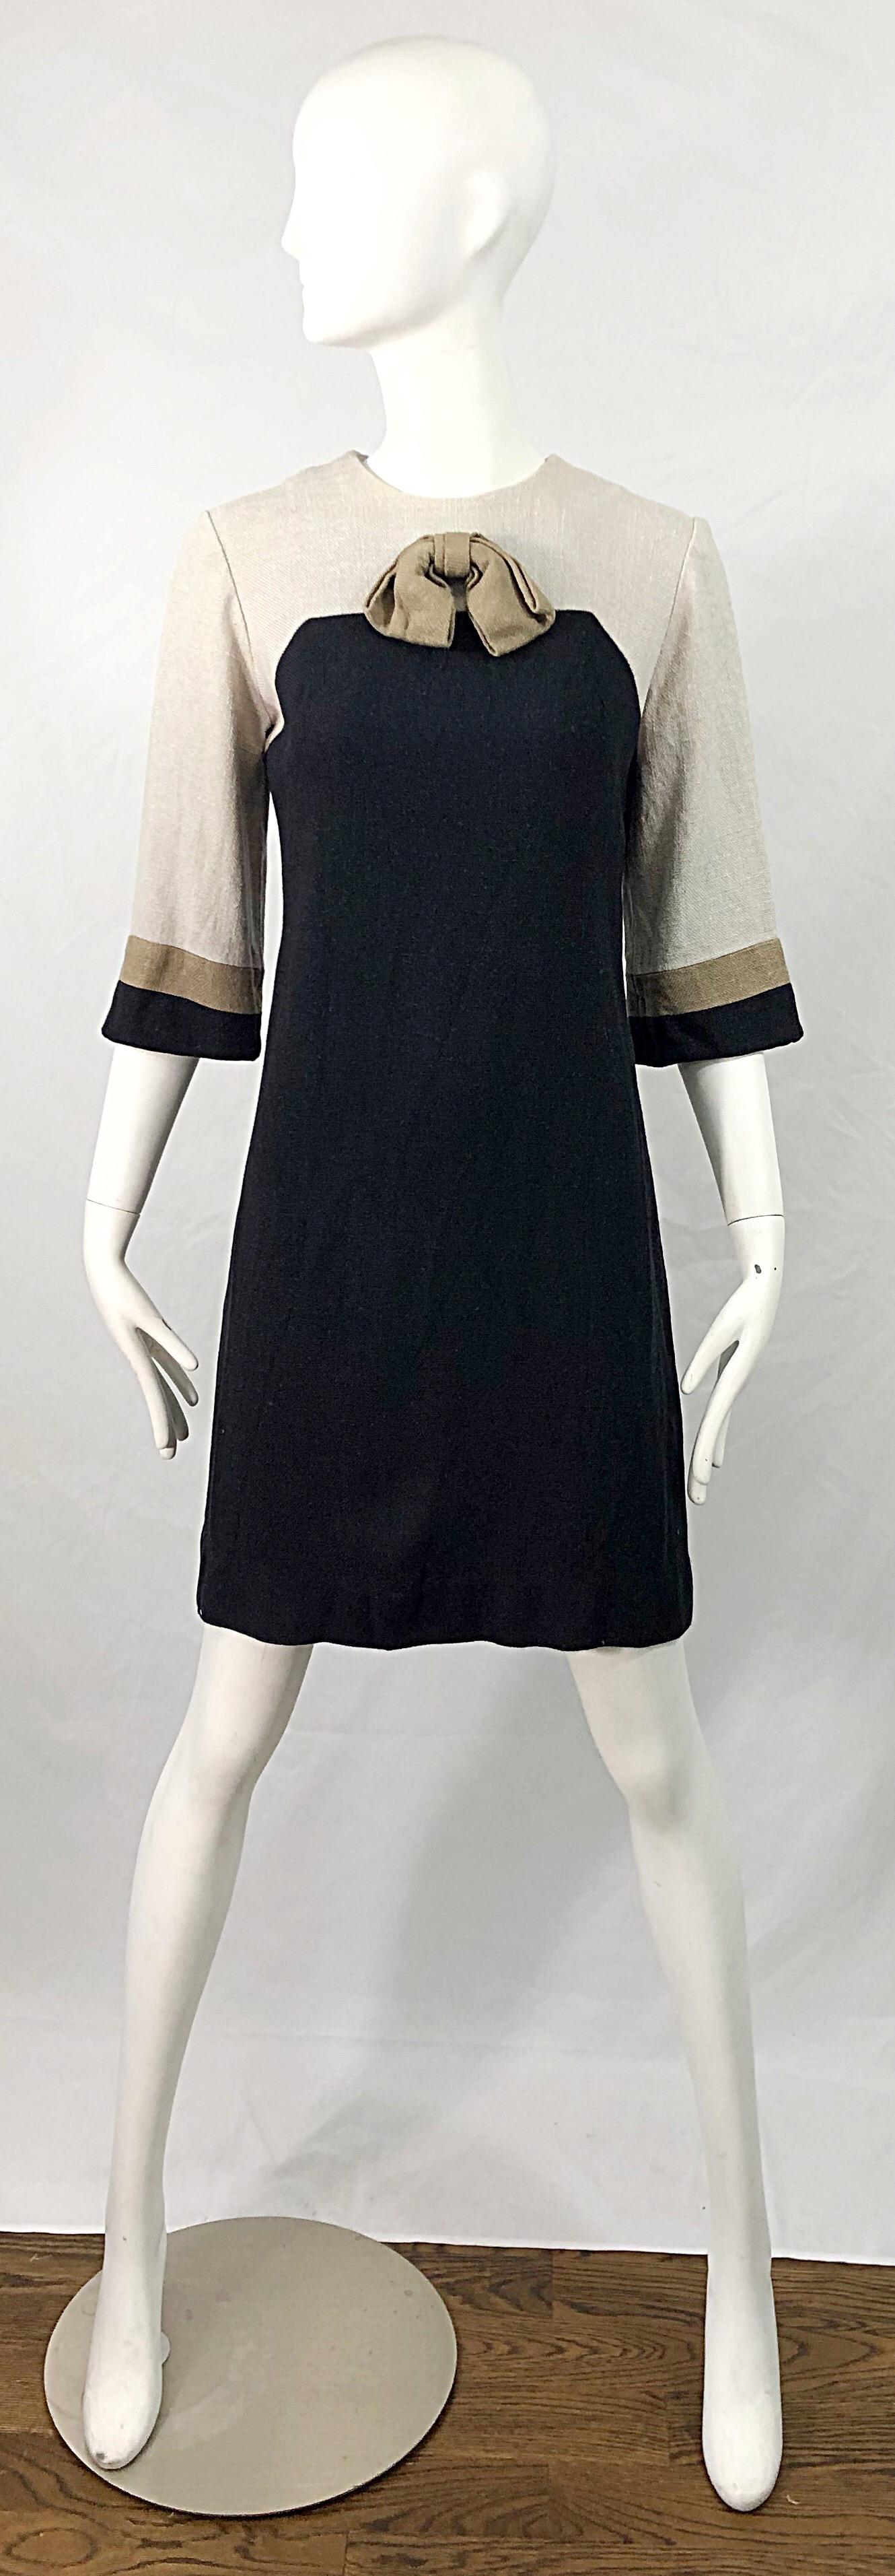 Chic 60s SHERBERT ORIGINALS black, beige and taupe linen 3/4 sleeve shift dress! Features a taupe neck and arms, with a beige / brown stripe at sleeve cuff and bow at center chest. Full metal zipper up the back with hook-and-eye closure. Very well